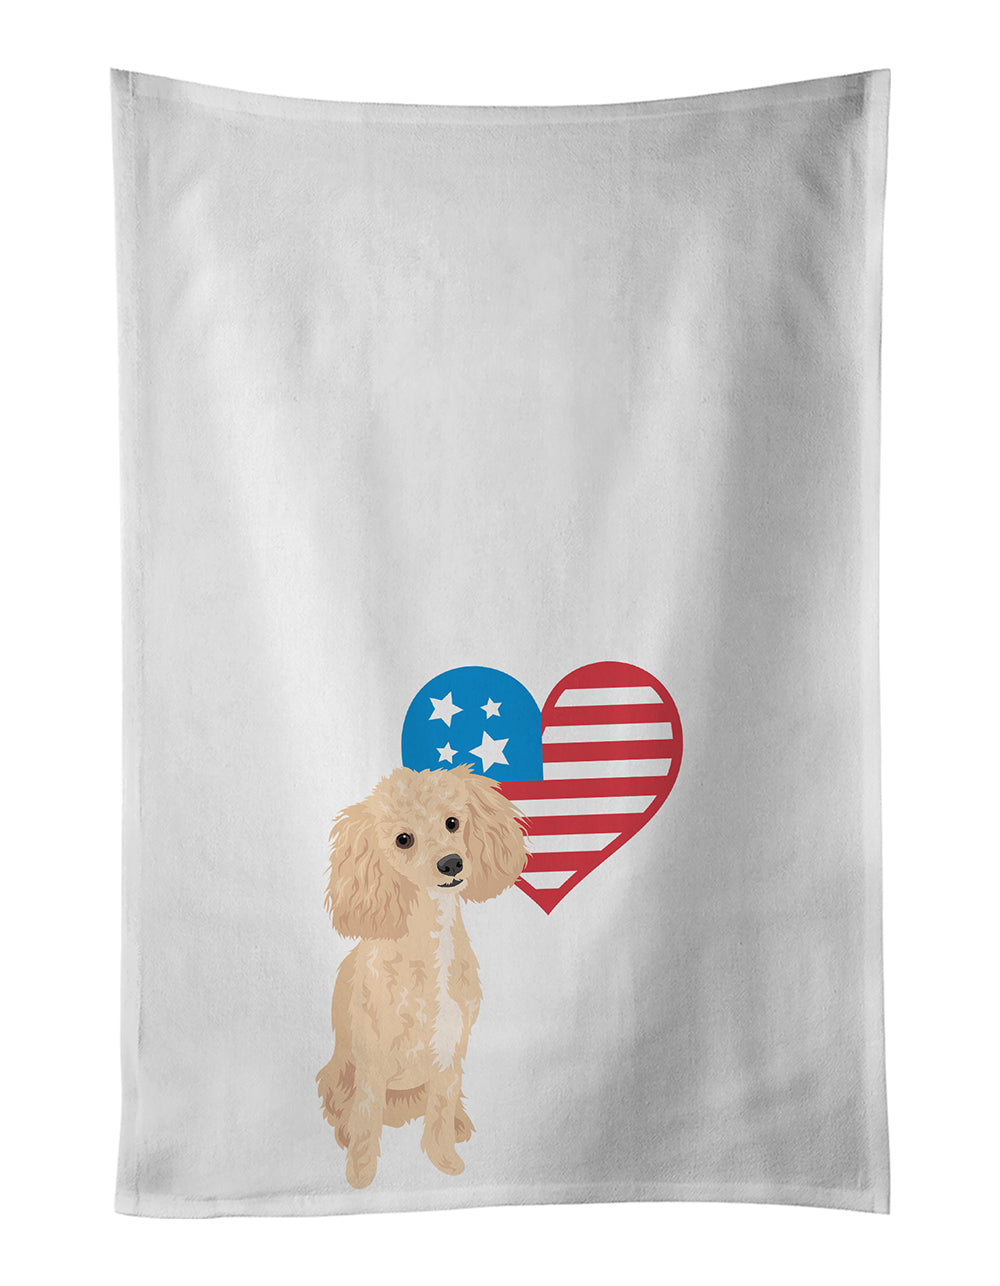 Buy this Poodle Toy Apricot #1 Patriotic White Kitchen Towel Set of 2